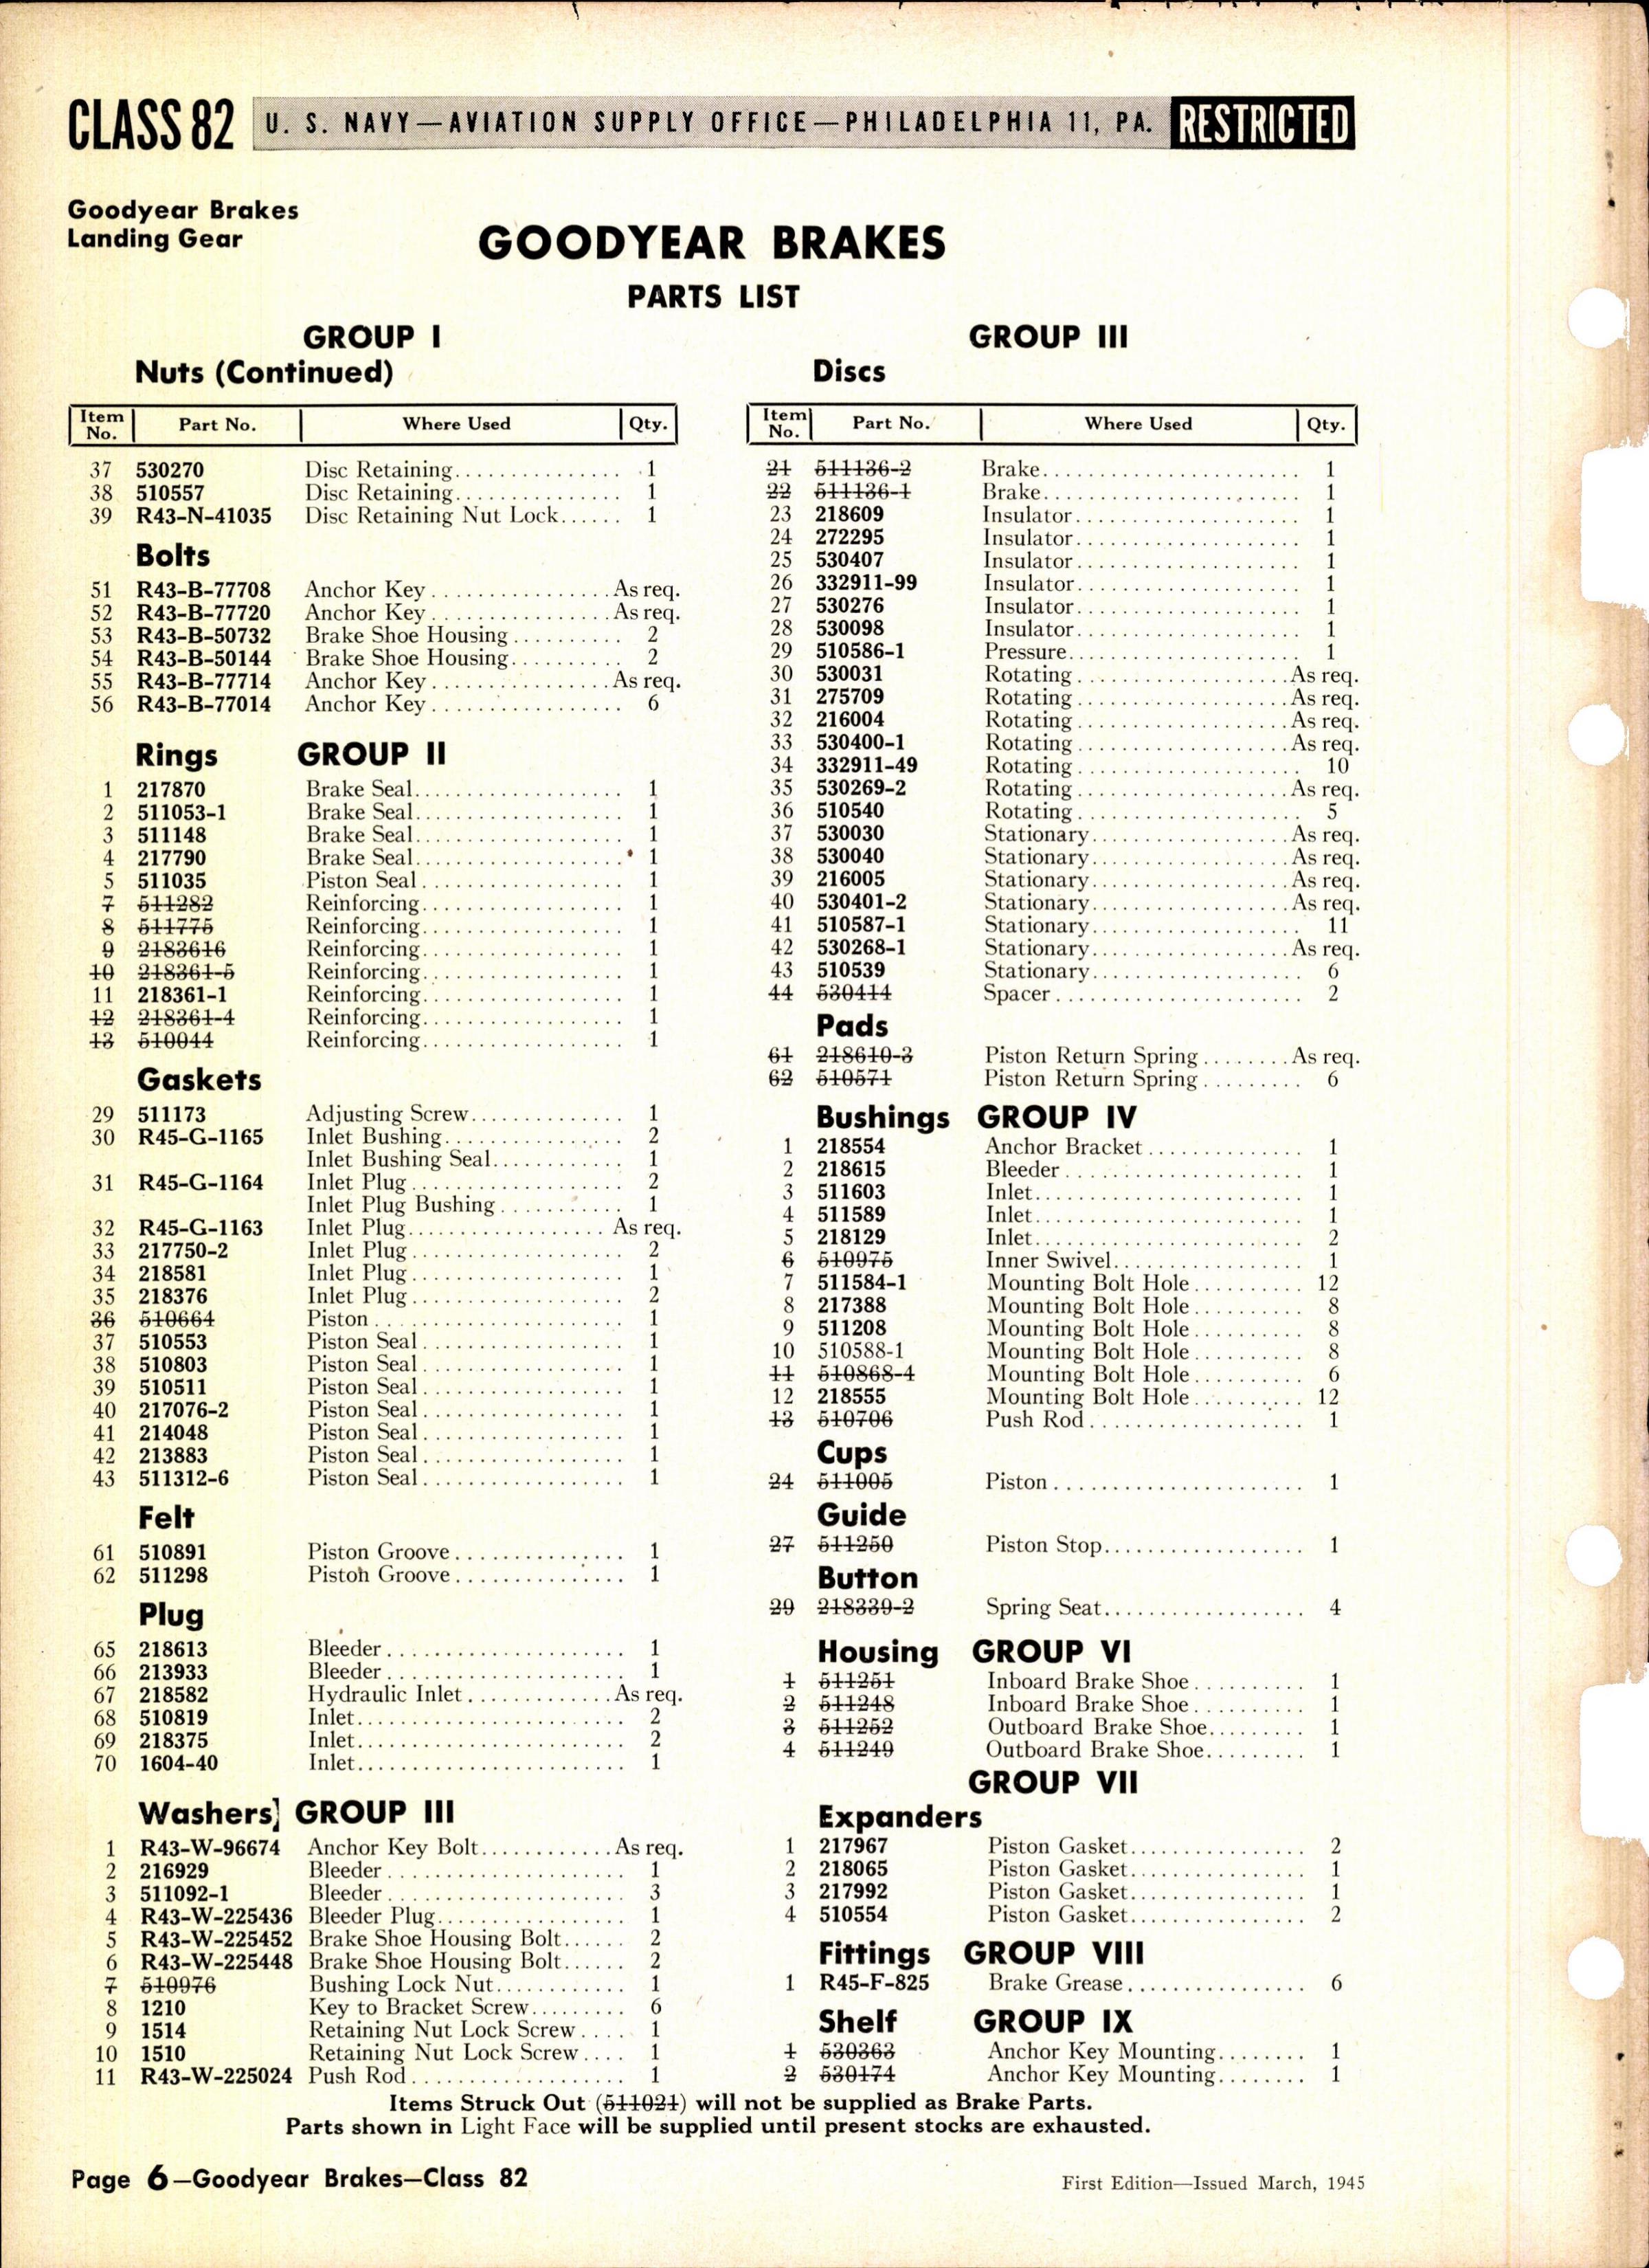 Sample page 6 from AirCorps Library document: Goodyear Brakes